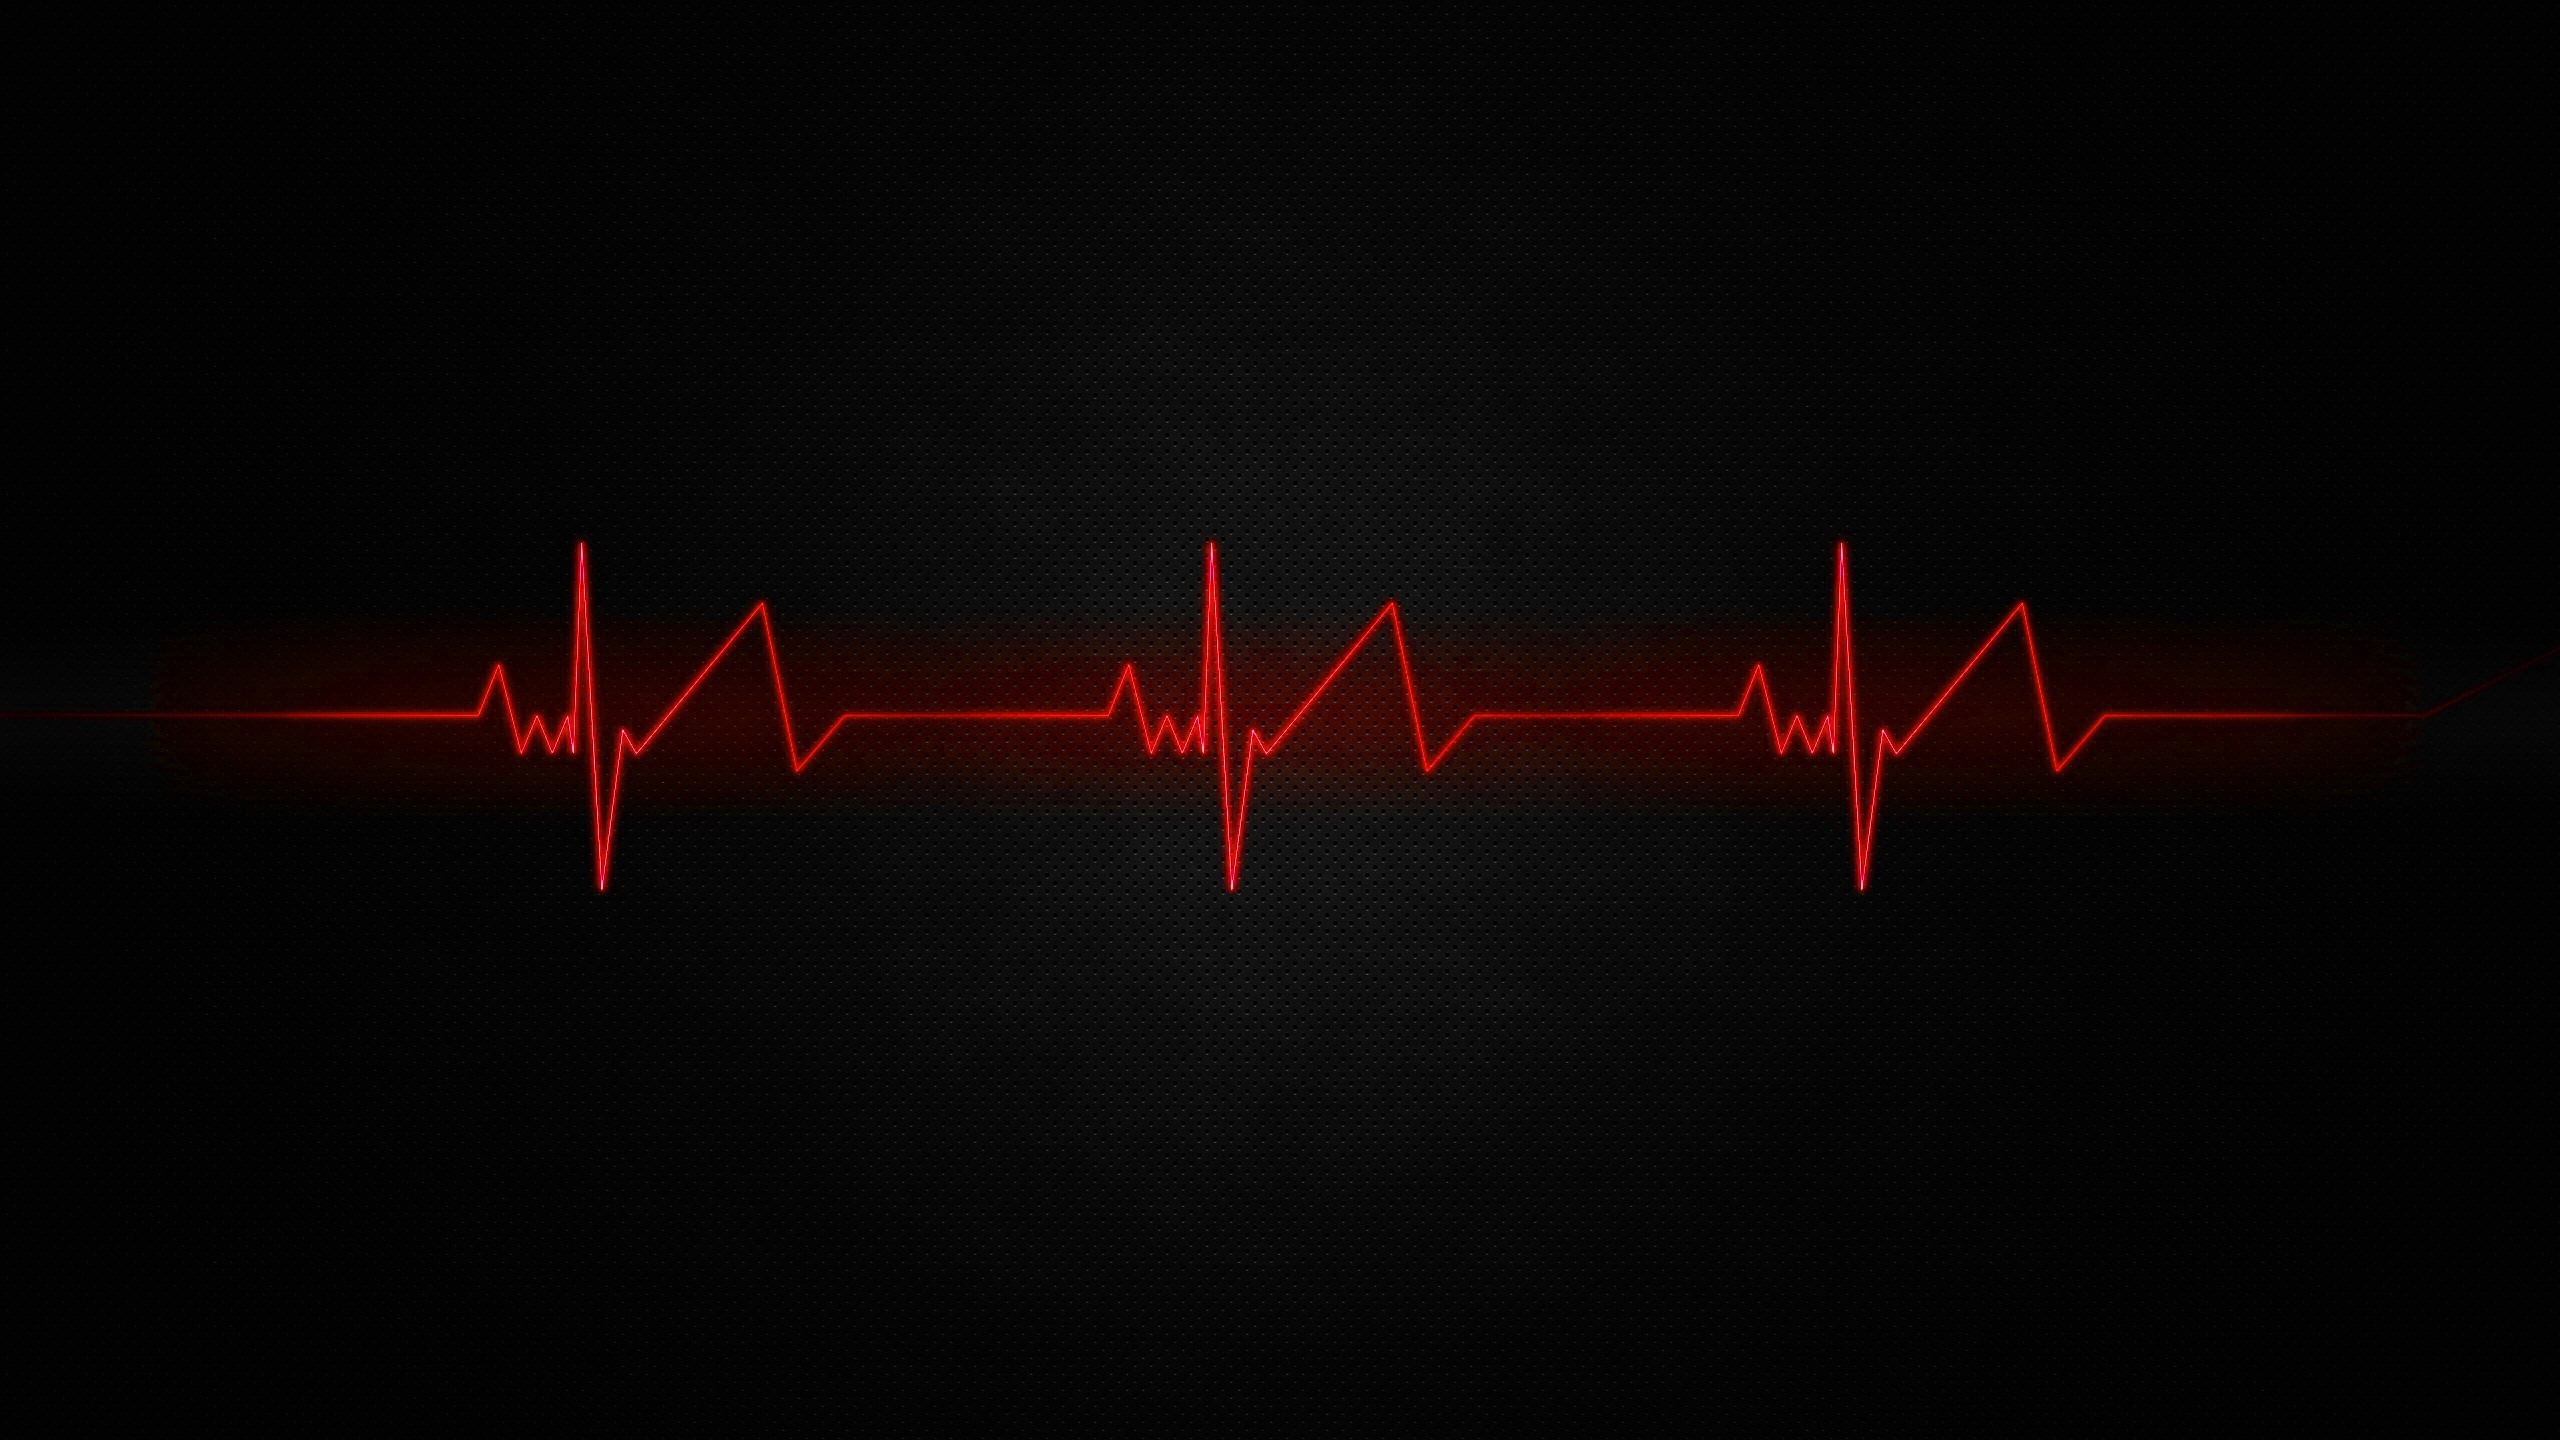 2560x1440 Backgrounds_Red_thread_heart_rate_on_a_black_background_104249_.jpg  (2560Ã1440) | pc wallpaper | Pinterest | Wallpaper